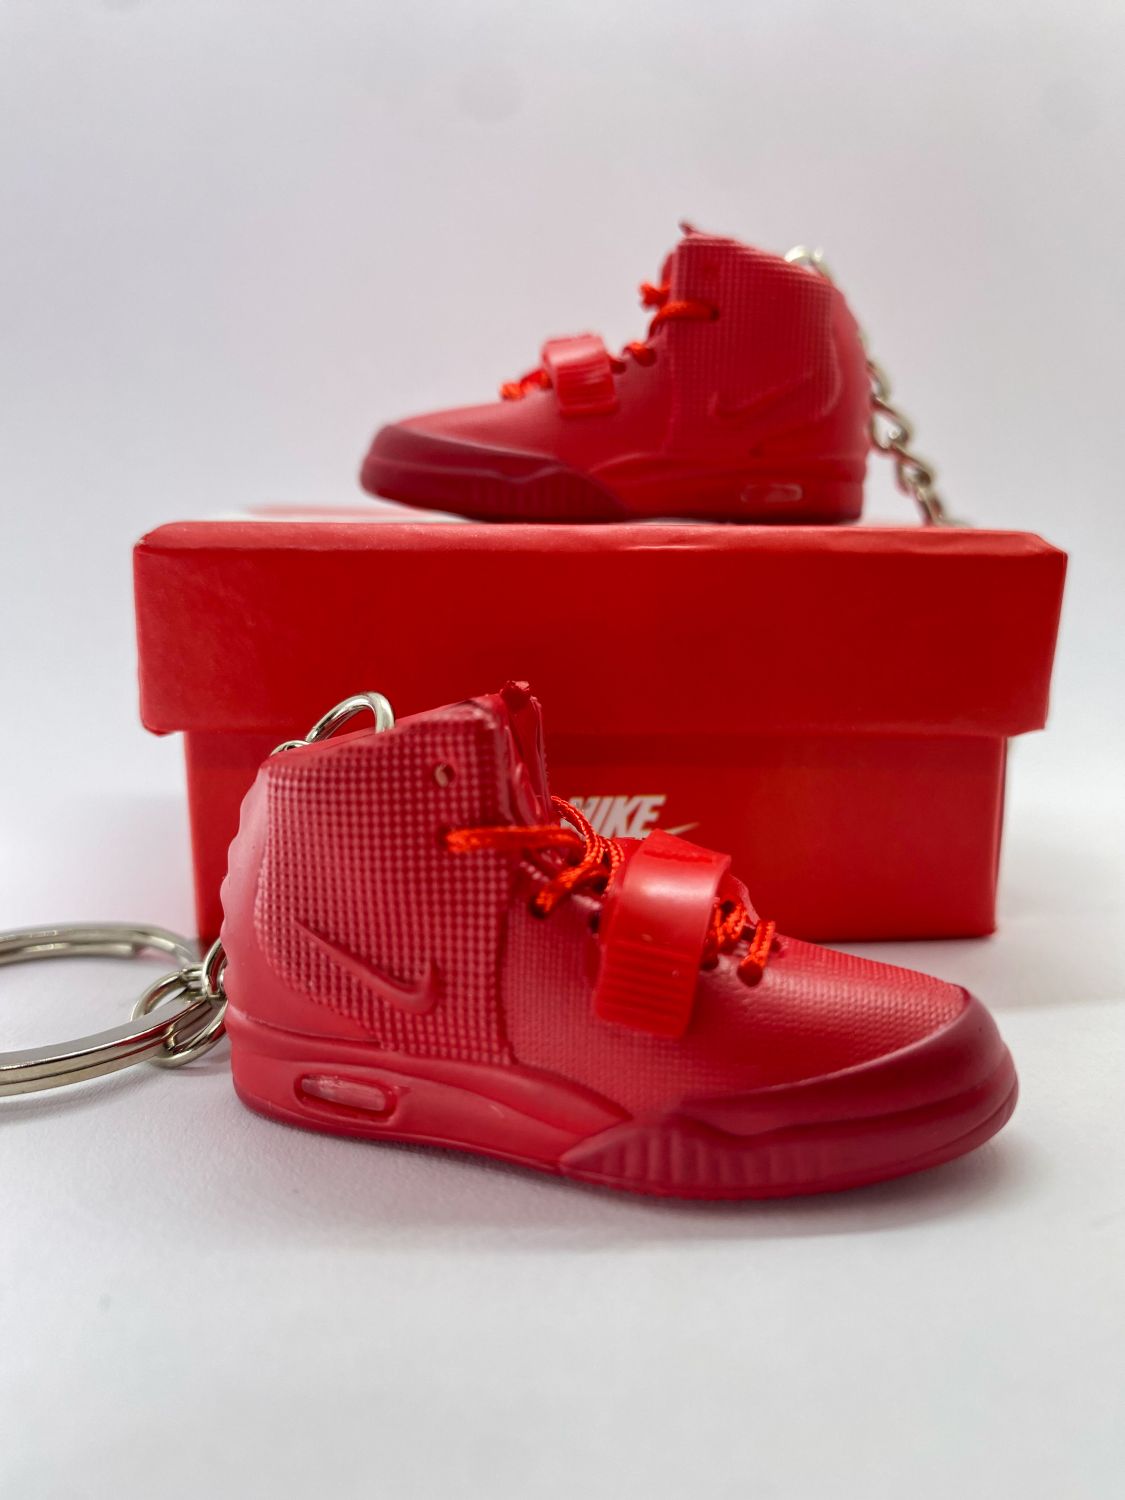 NIKE AIR YEEZY RED OCTOBER